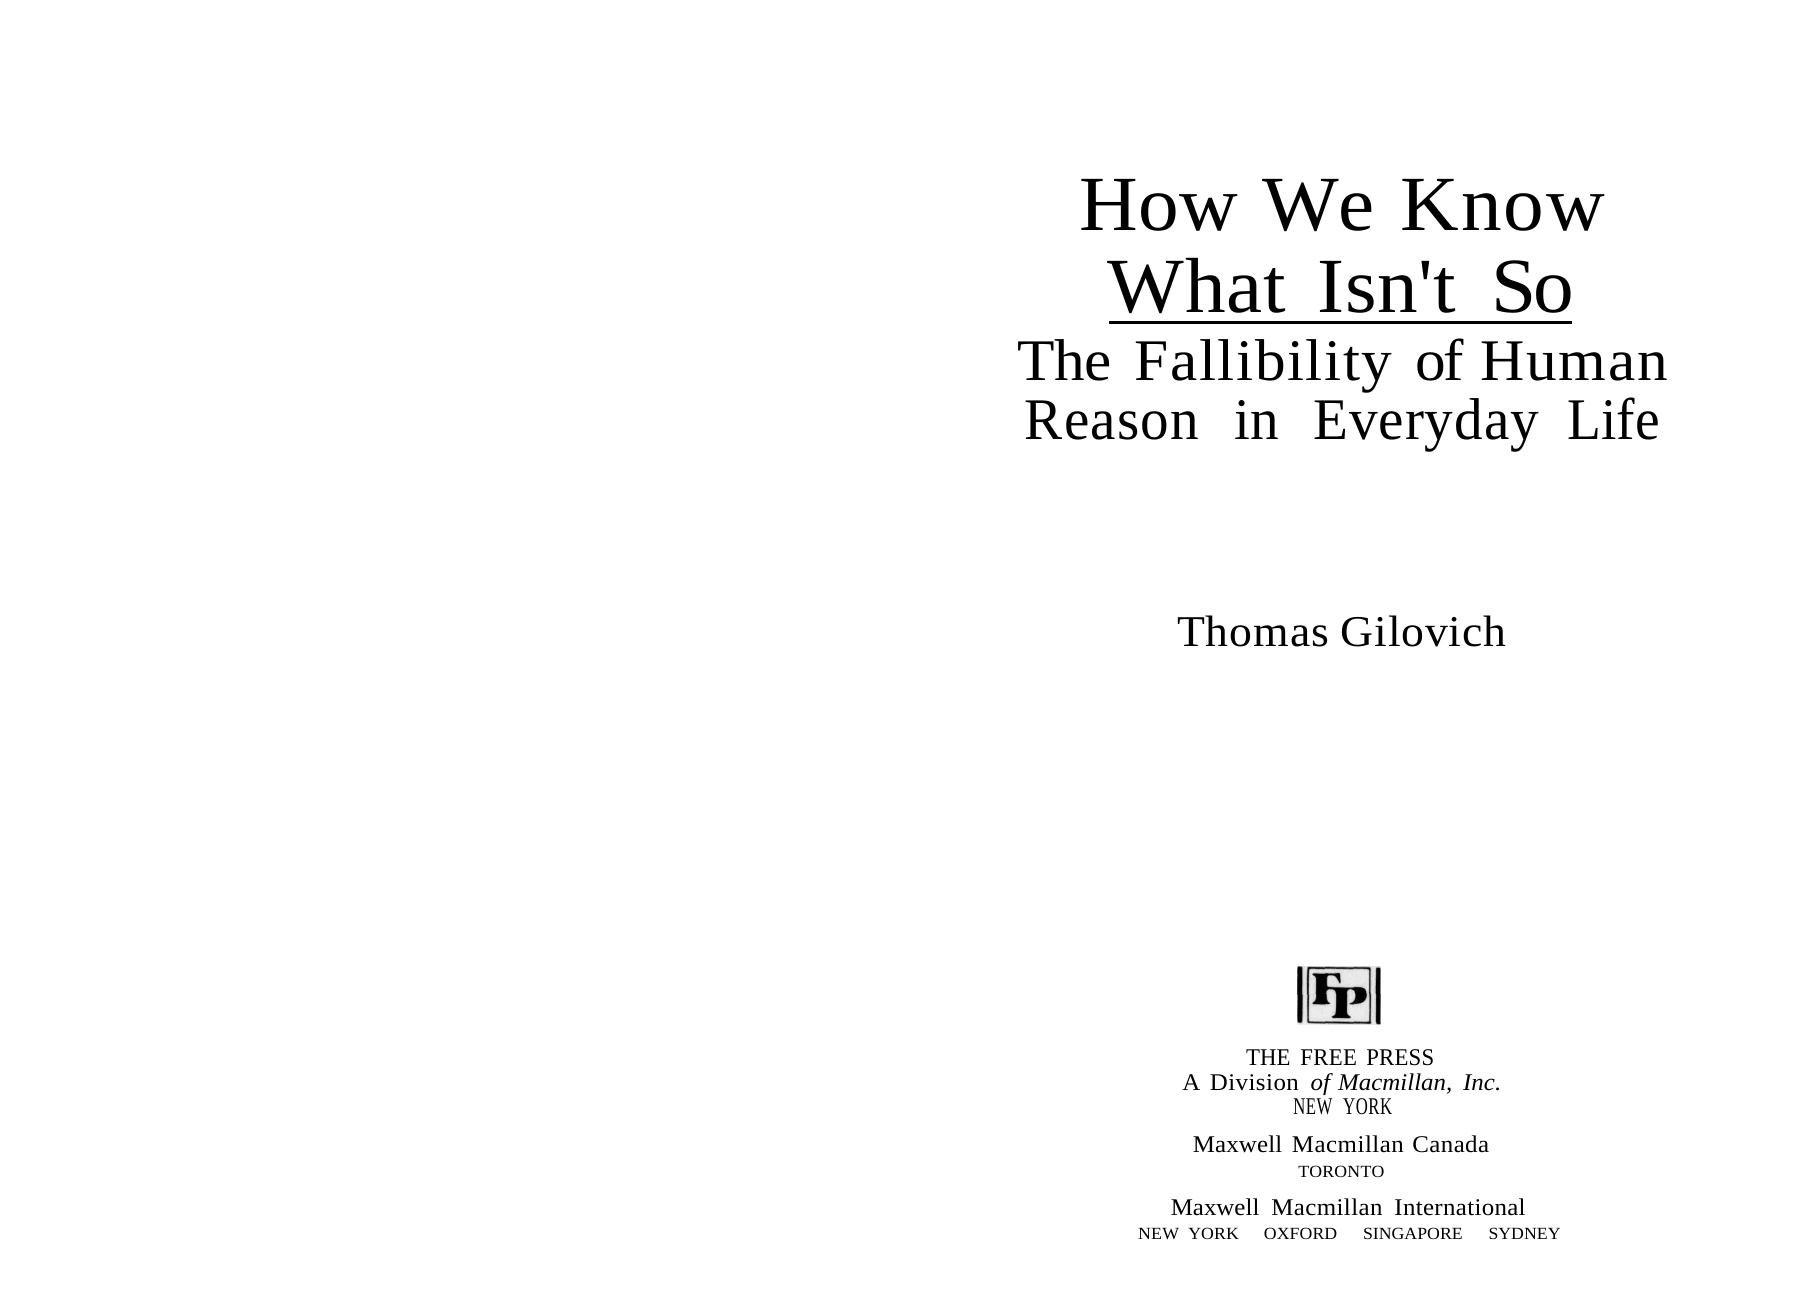 How We Know What Isn't So: The Fallibility of Human Reason in Everyday Life by Thomas Gilovich